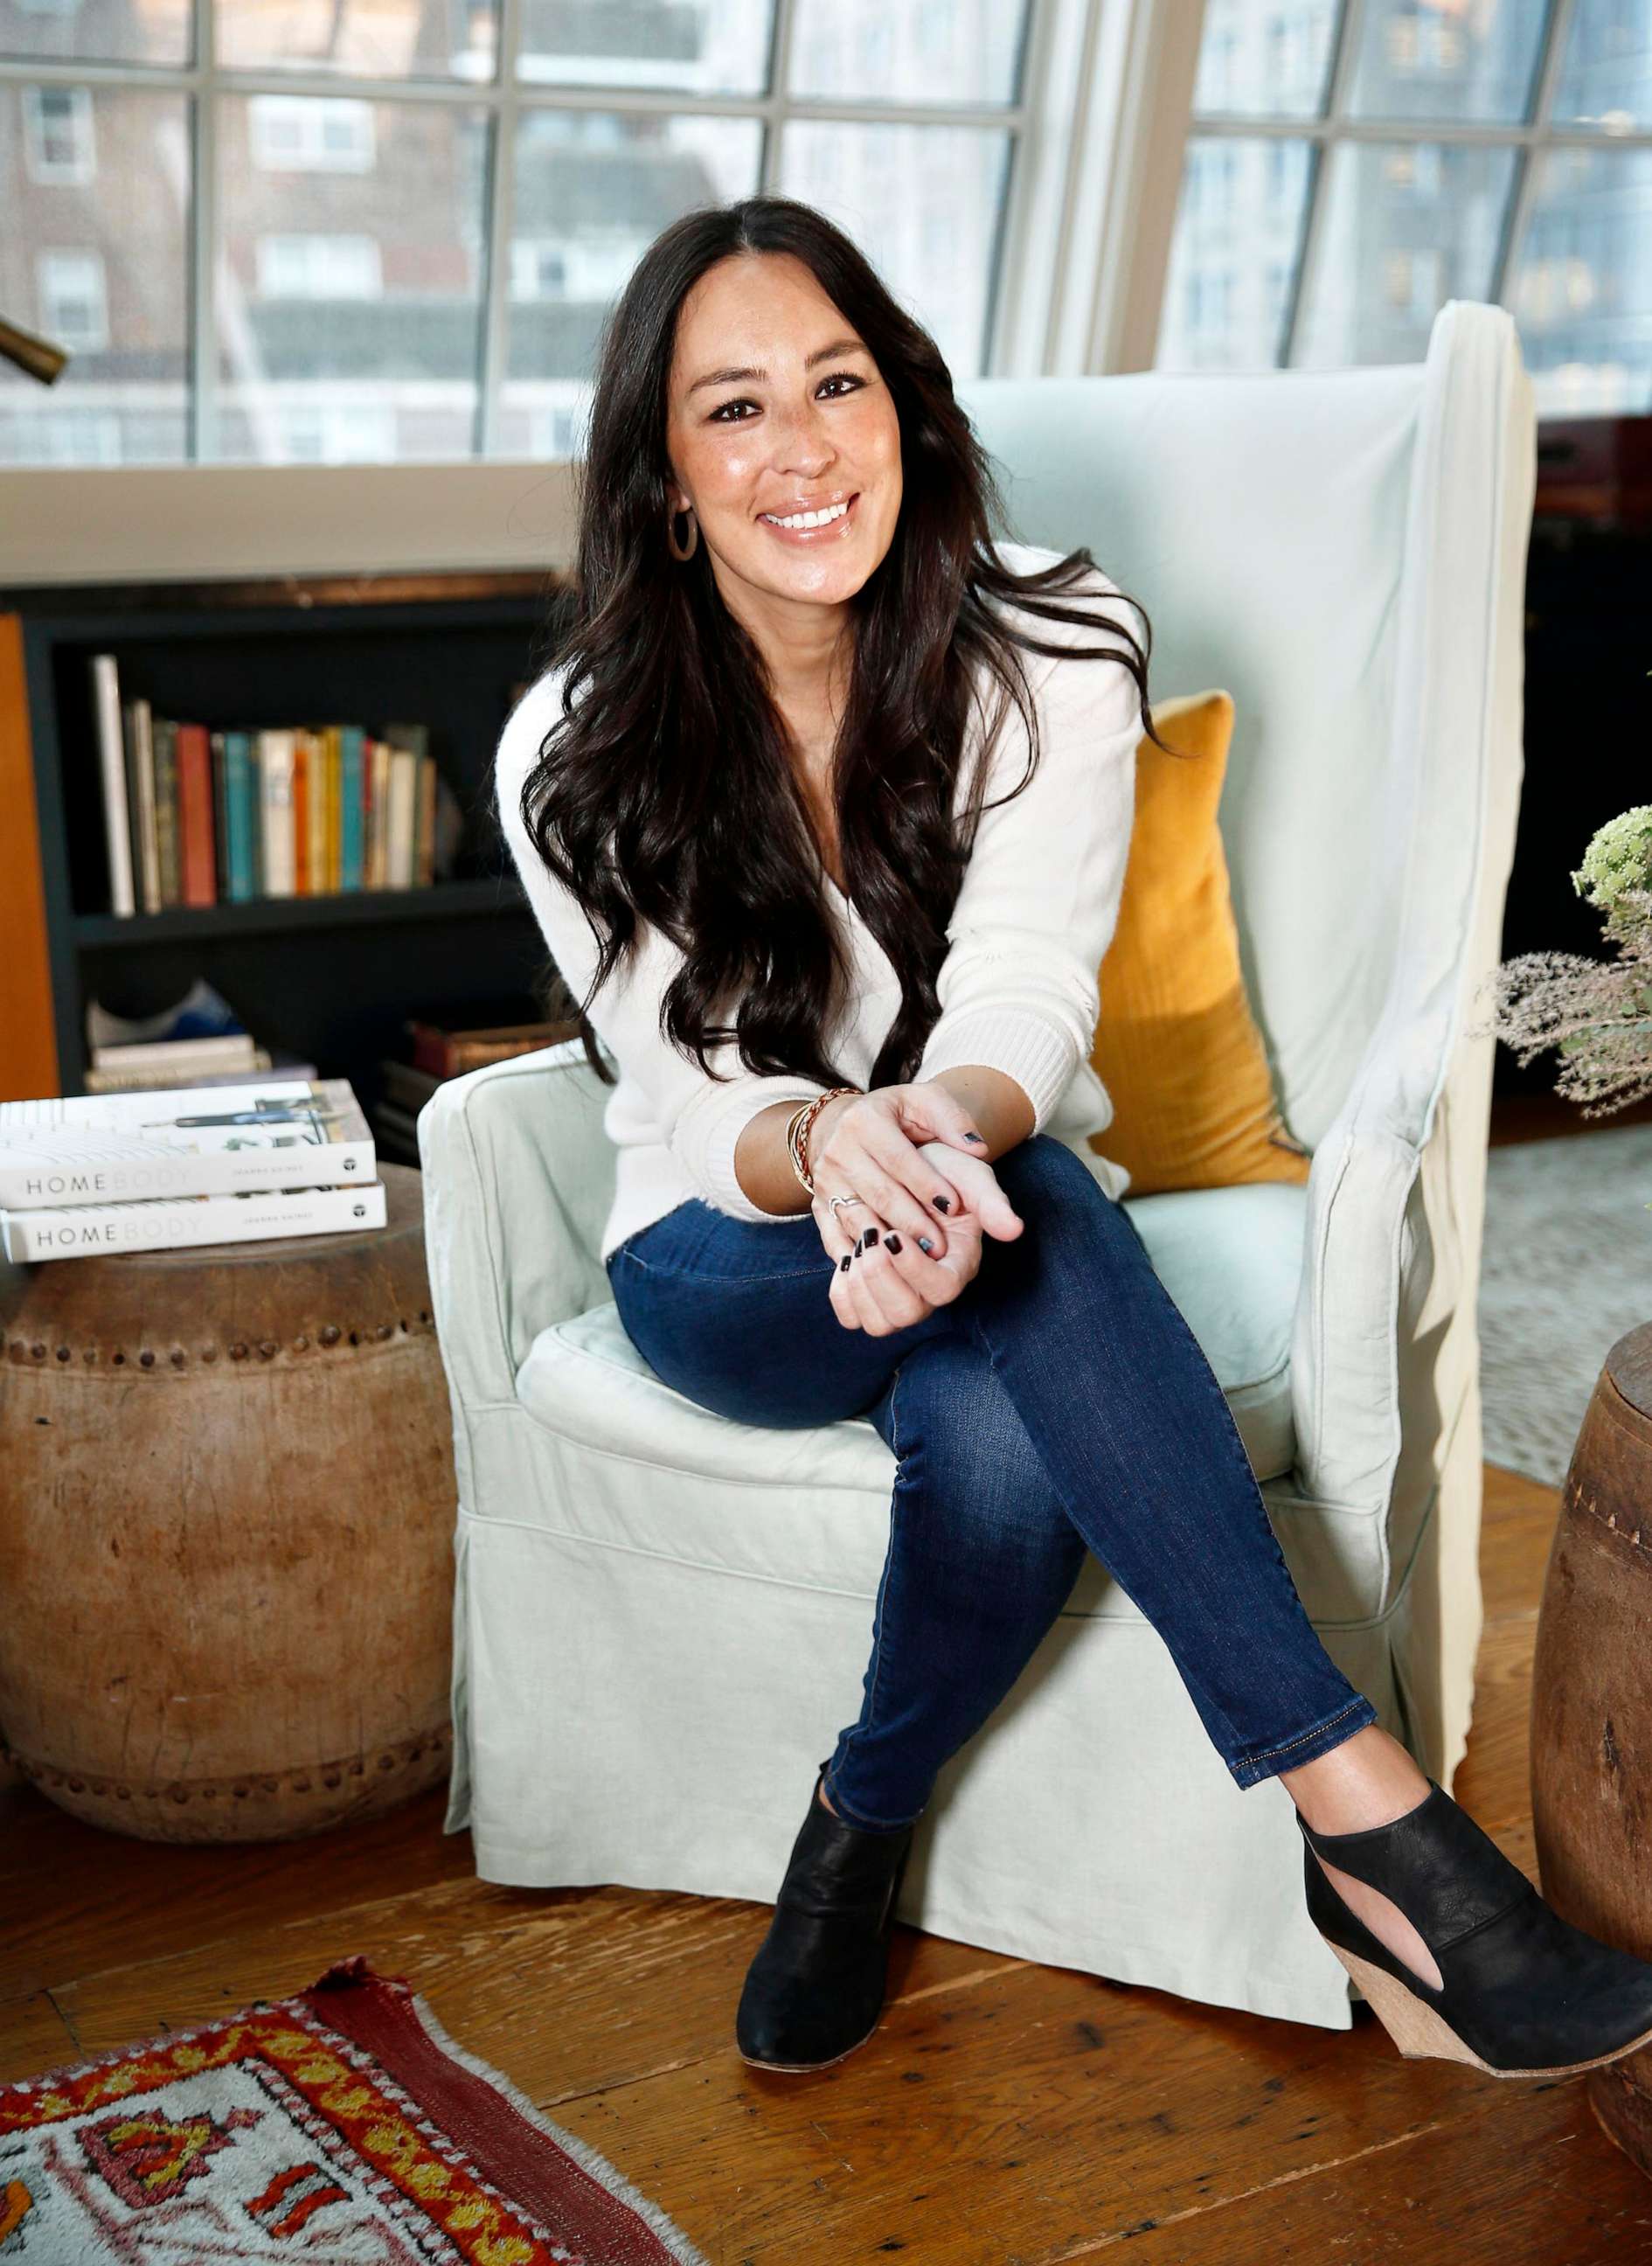 PHOTO: In this Nov. 6, 2018, file photo, Joanna Gaines poses for a portrait in New York.